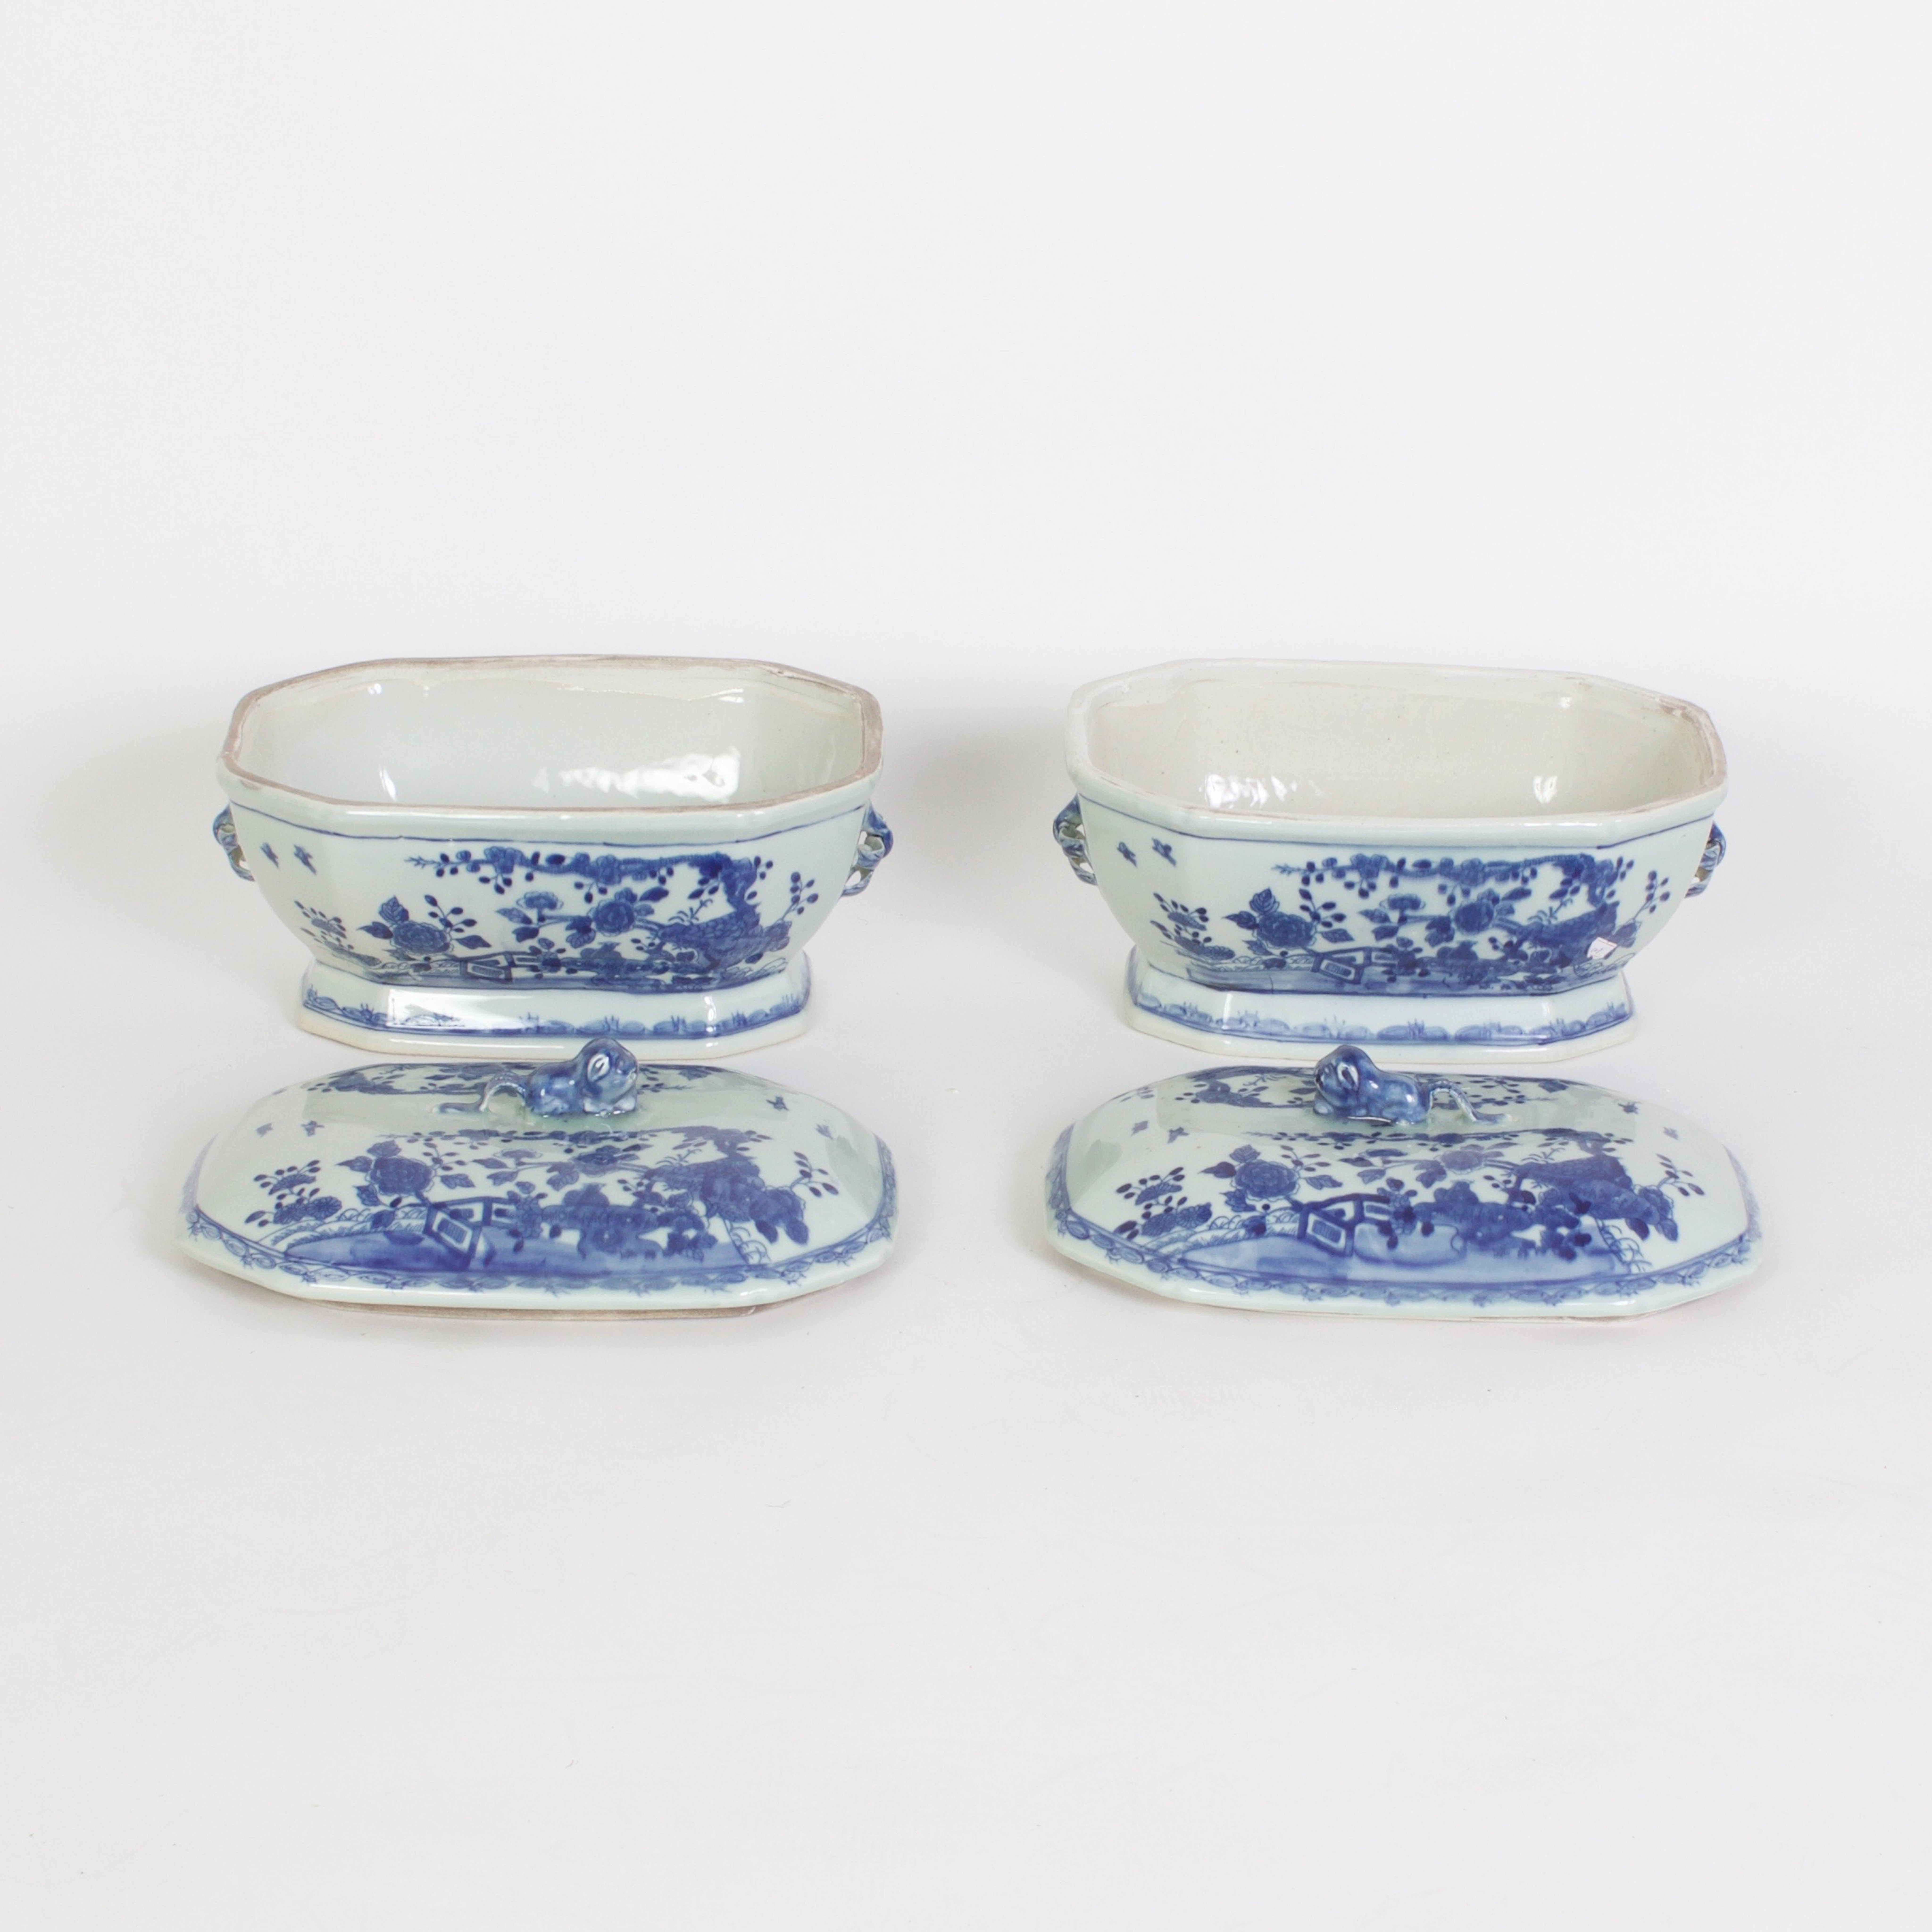 Pair of Chinese Export style blue and white porcelain lidded tureens decorated with floral scenes and featuring orchid handles on the sides and monkey handles on the lids. (Priced individually).